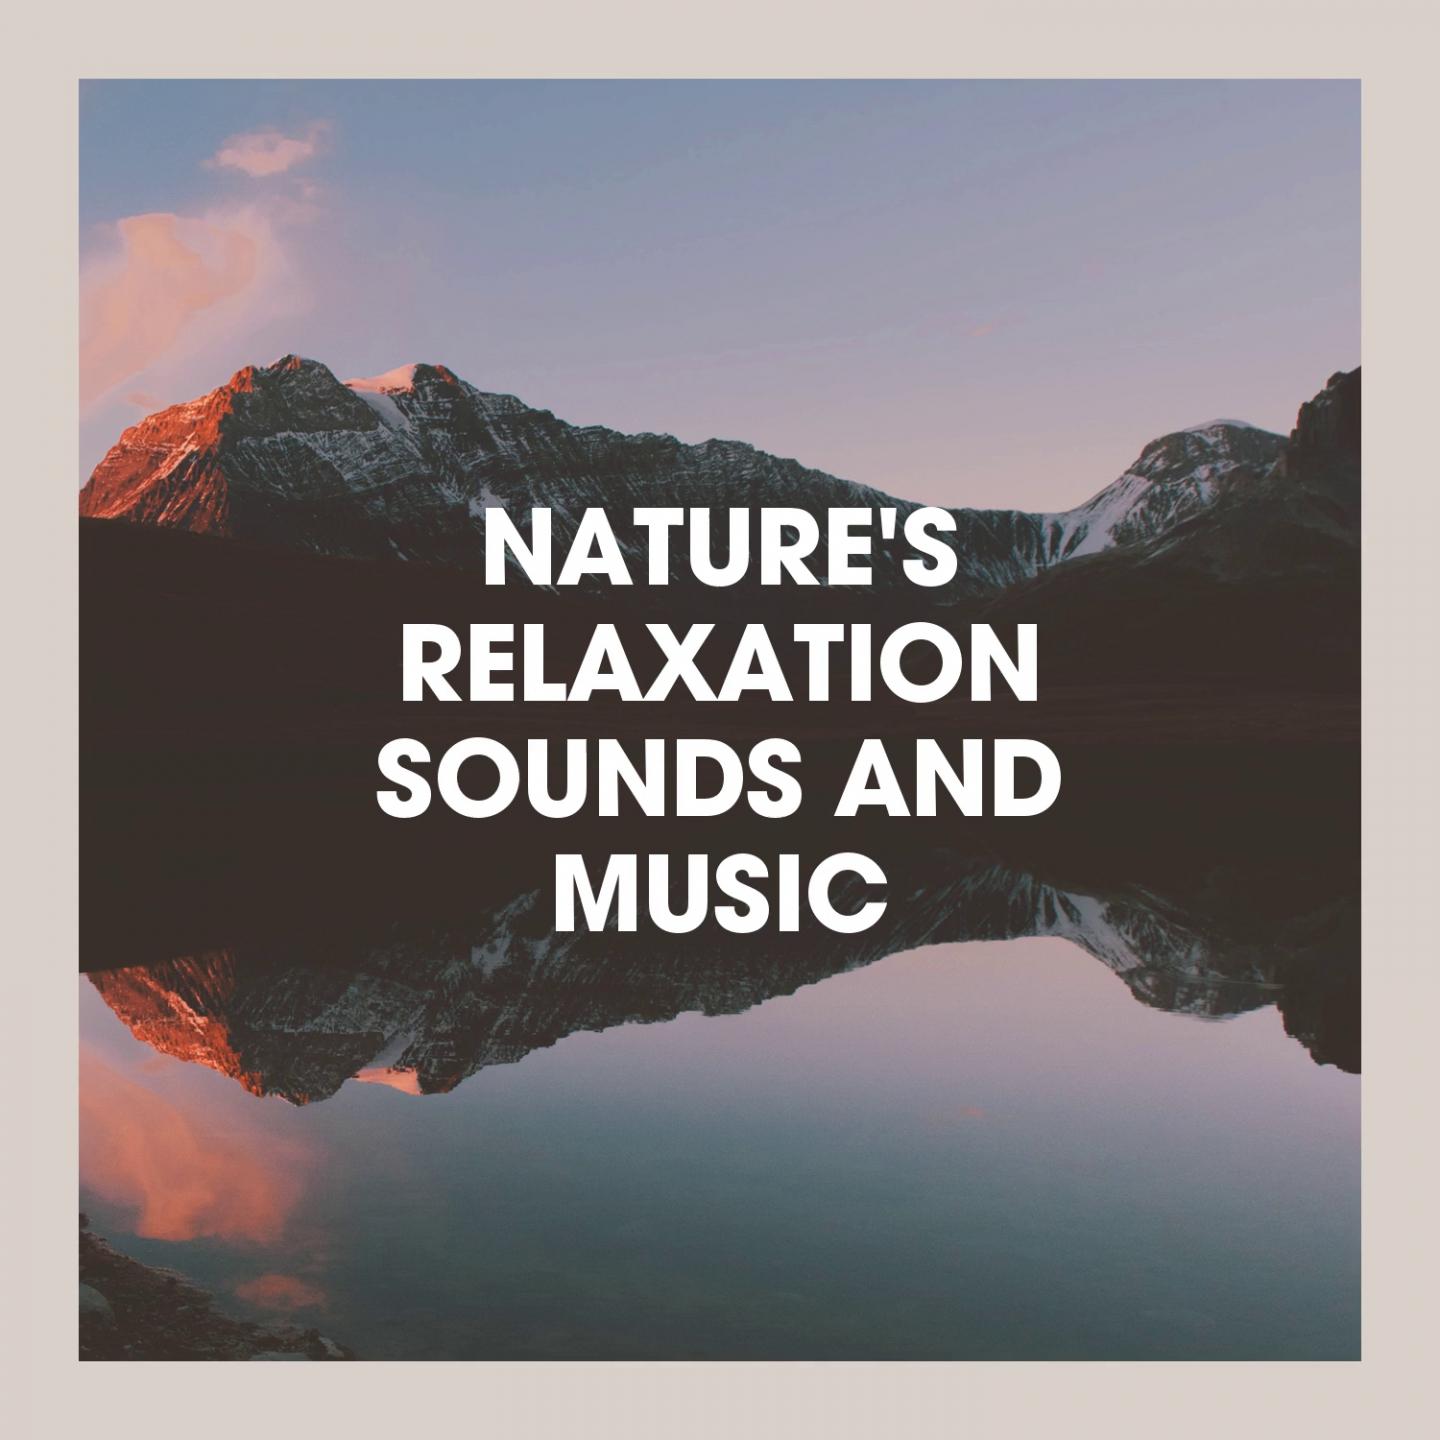 Nature's Relaxation Sounds and Music